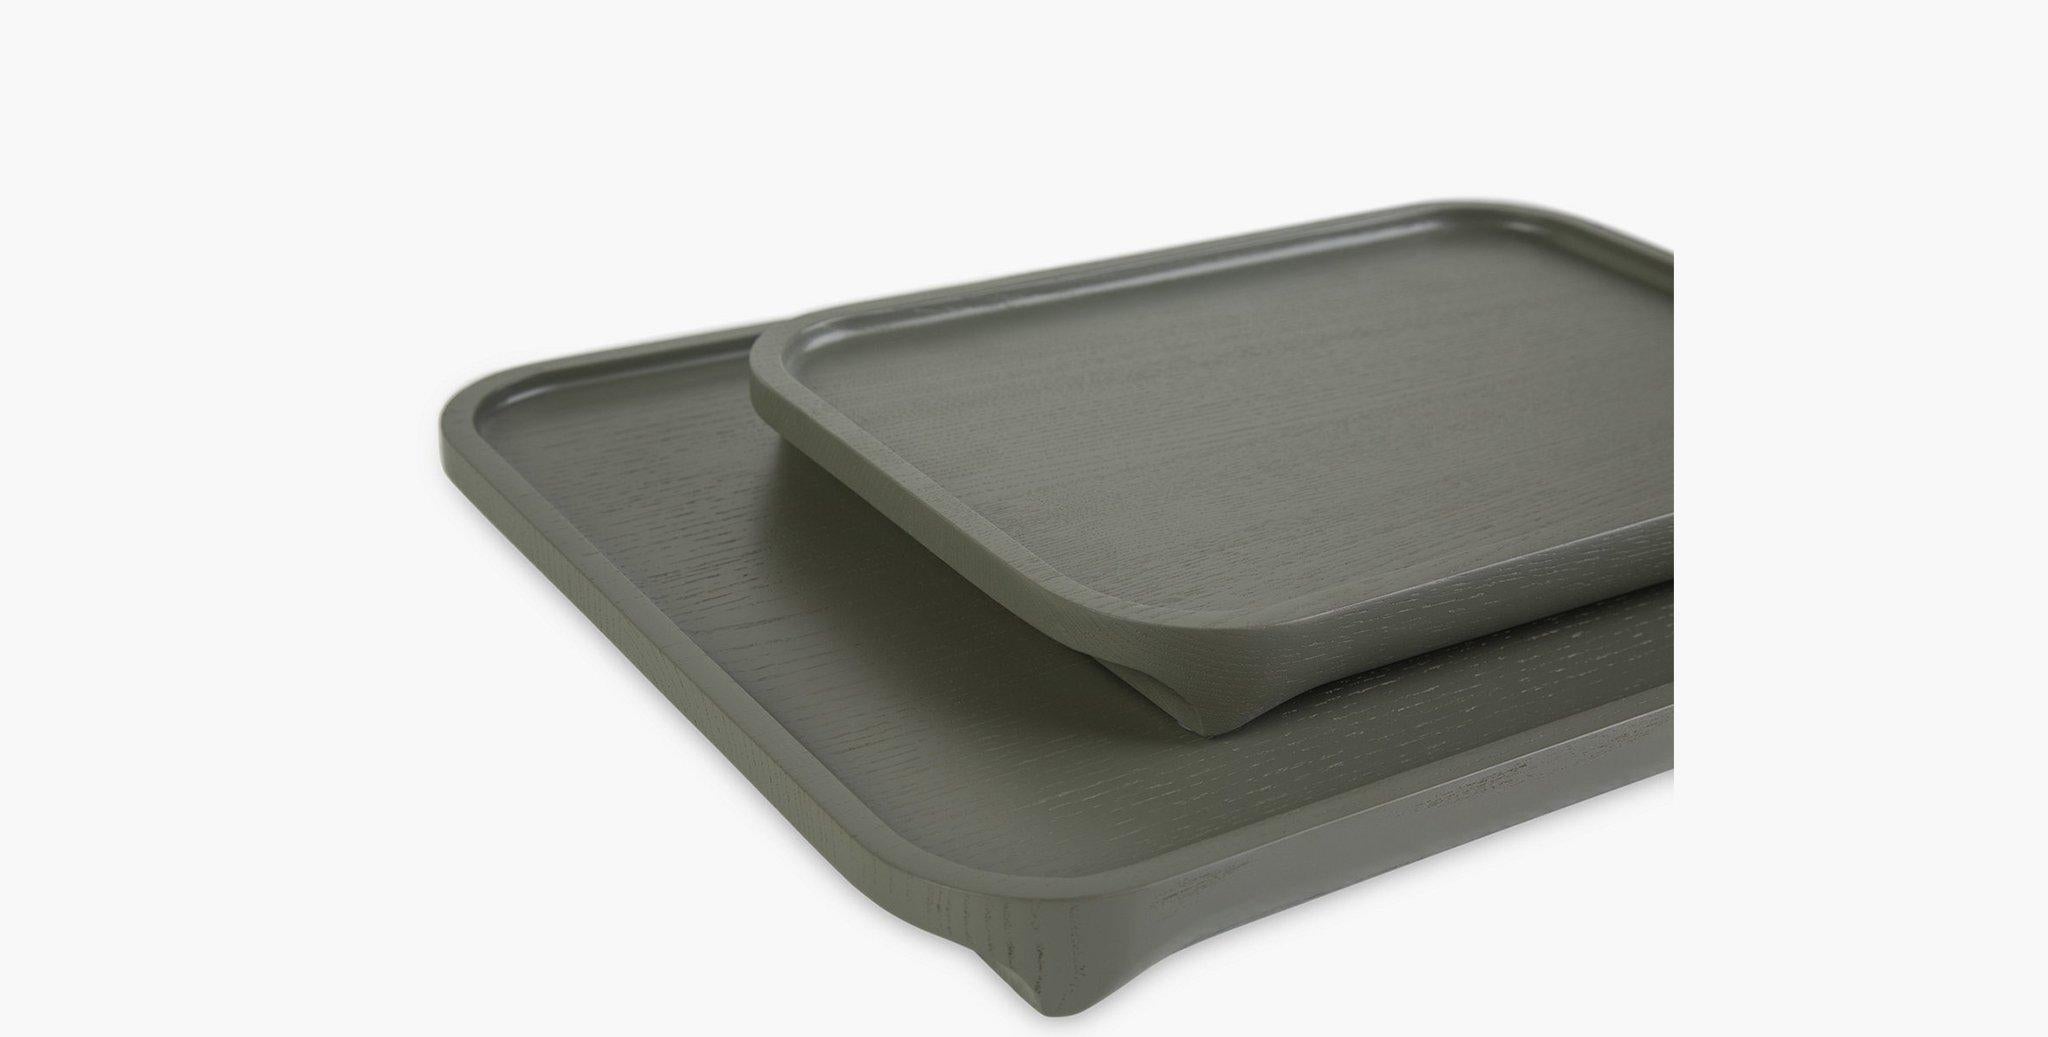 Our Santo Trays have a modern rounded edge, carved sloped feet and subtle lip. A matte green finish adds to this minimal Japanese inspired silhouette. 

Available in 2 sizes.